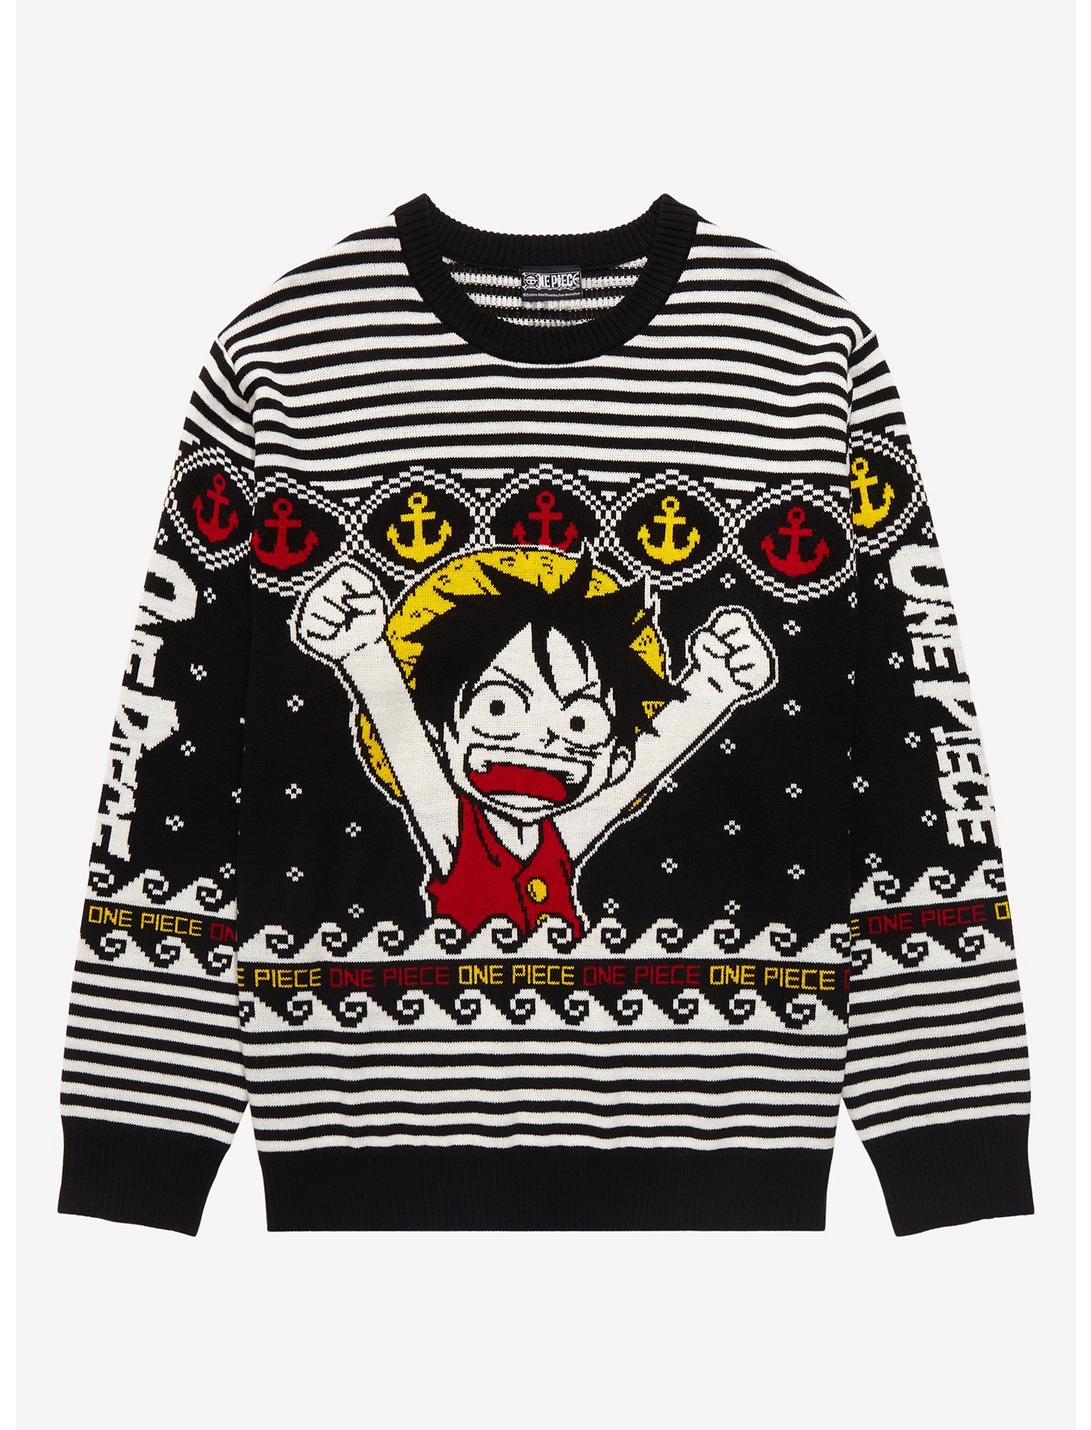 One Piece Chibi Monkey D. Luffy Holiday Sweater - BoxLunch Exclusive, BLUE, hi-res